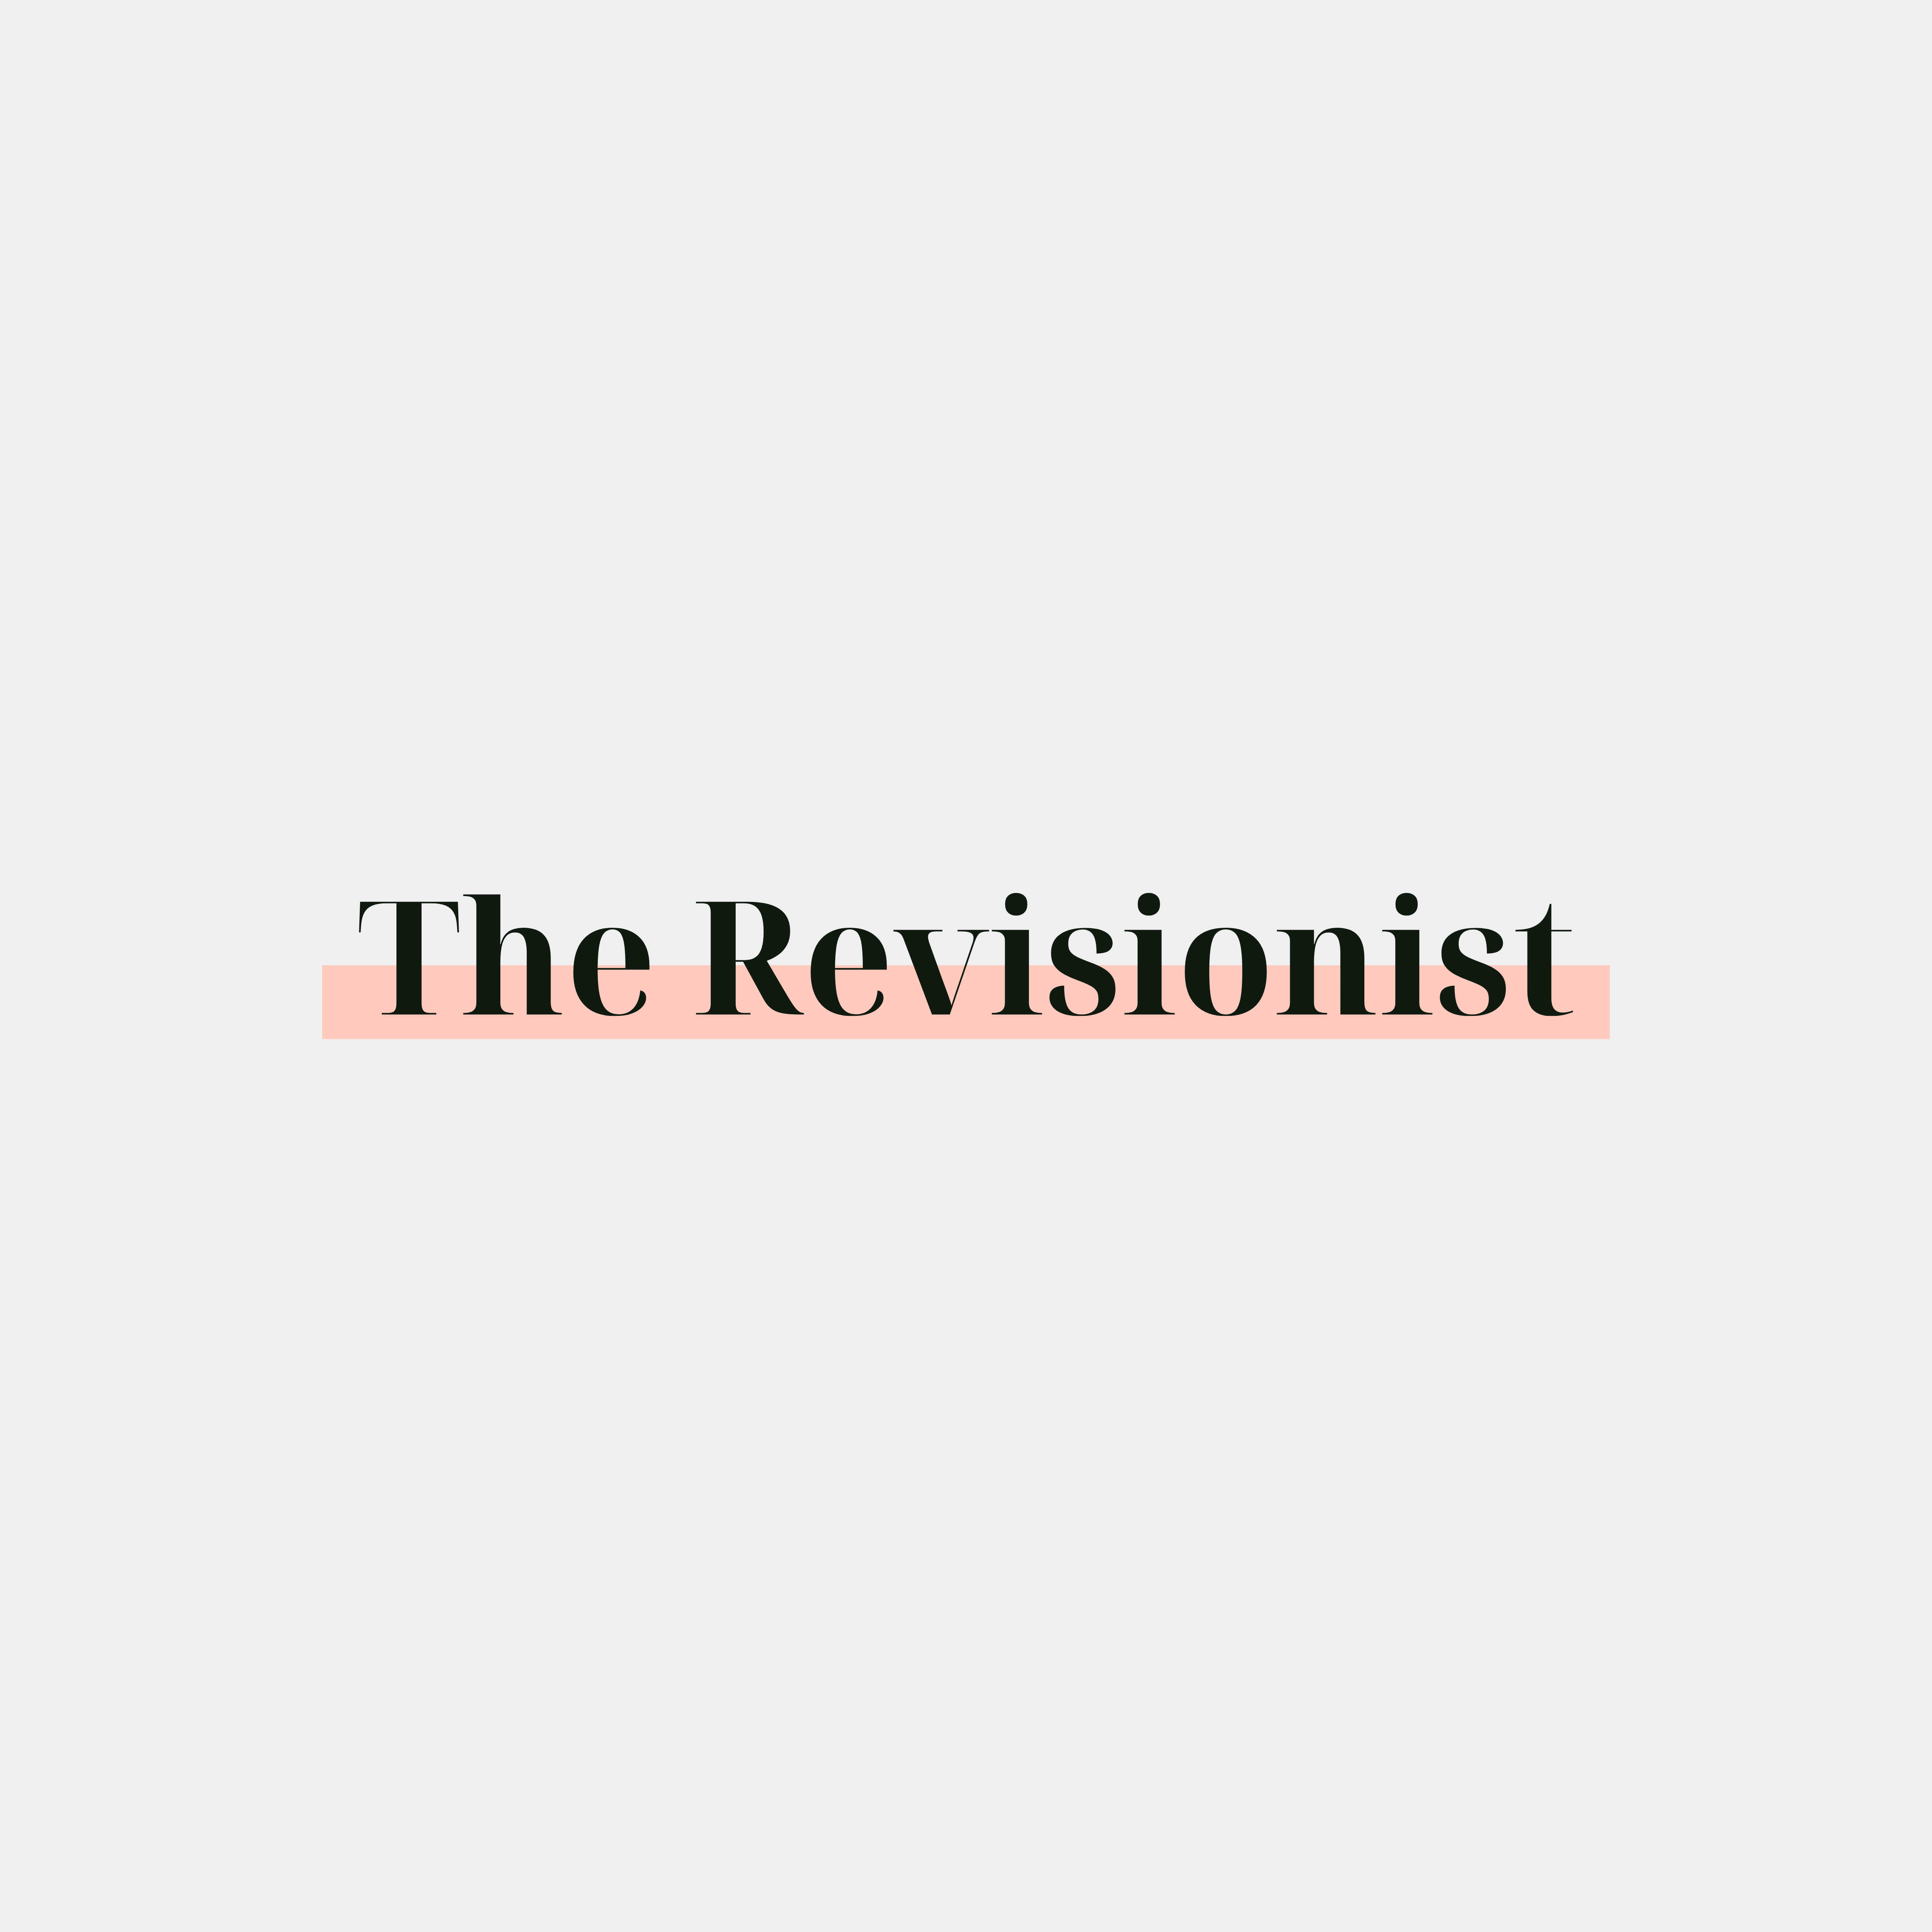 Artwork for The Revisionist